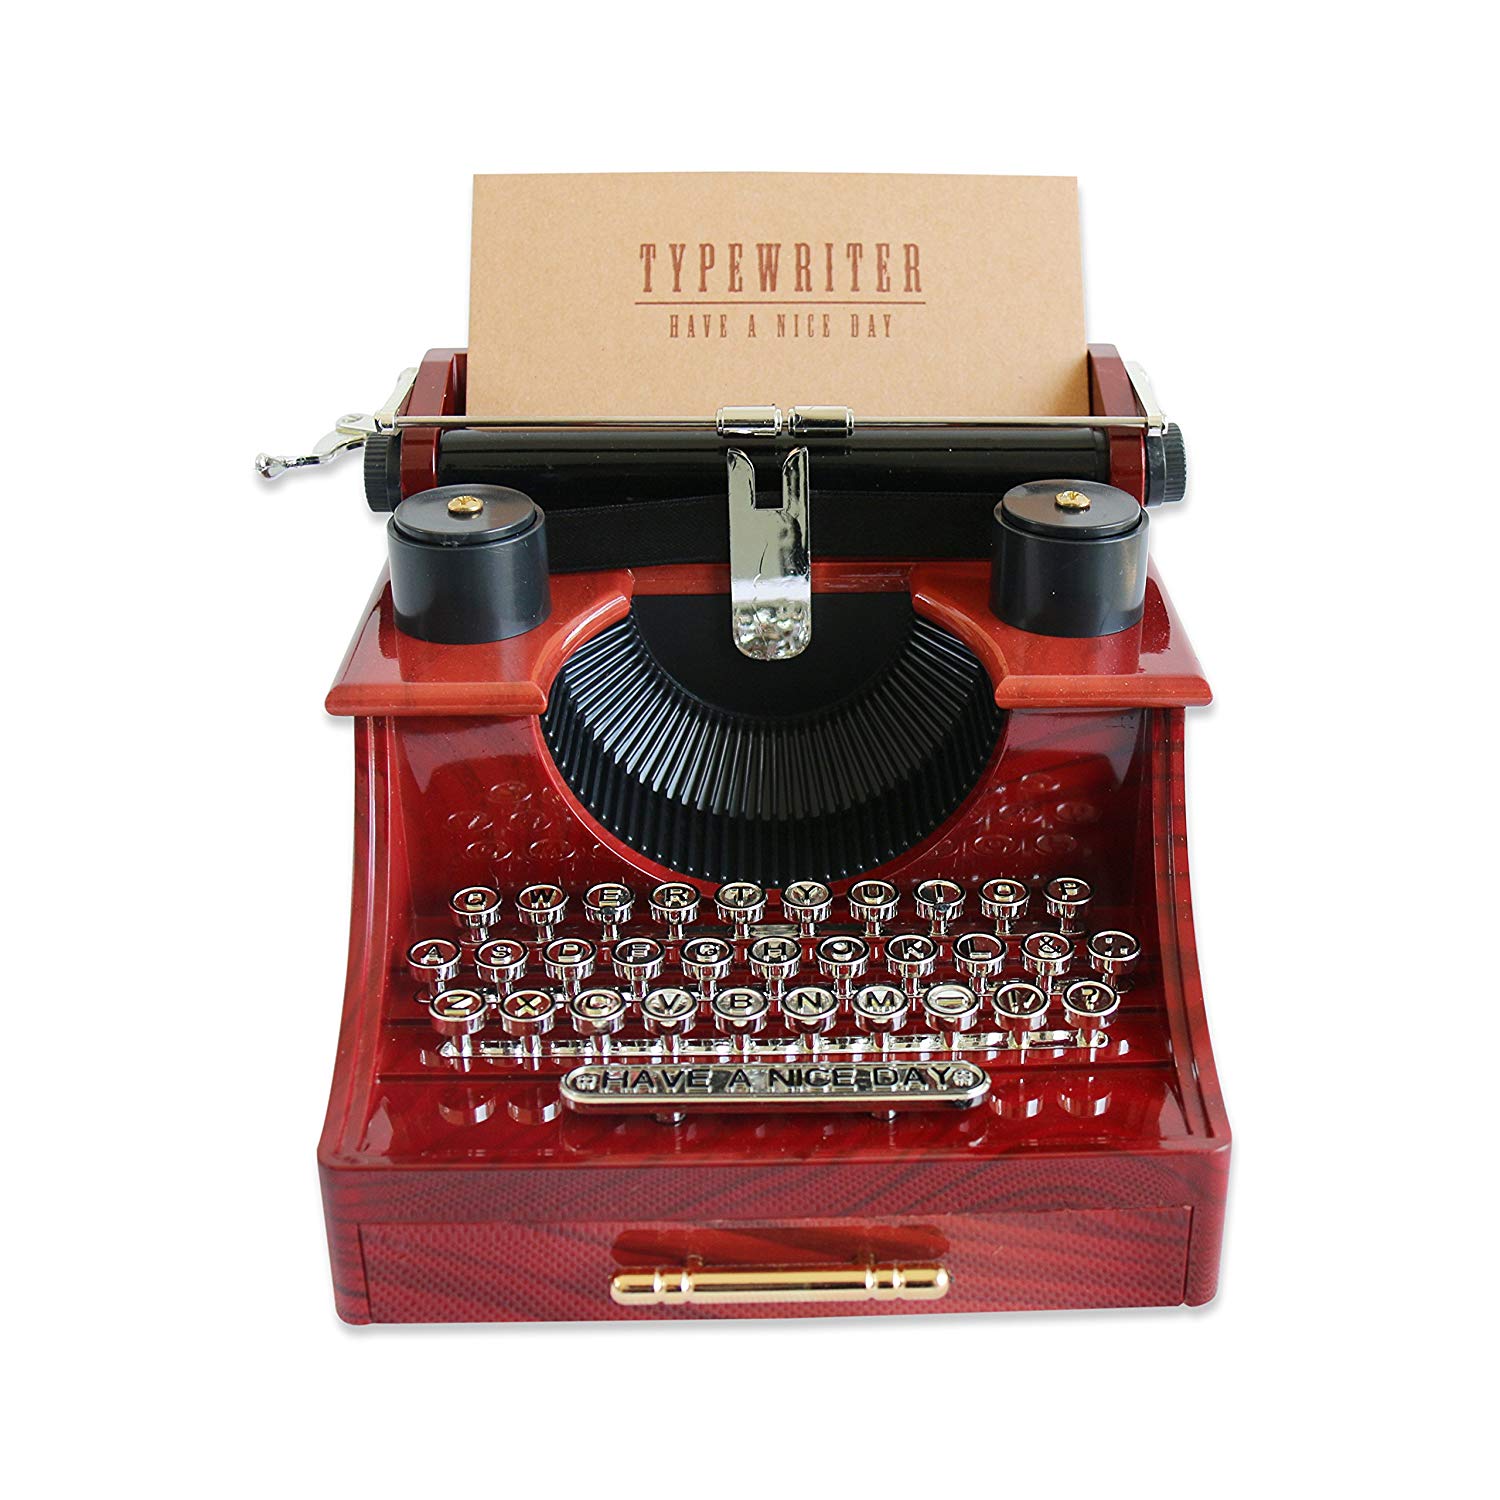 Amazon.com: Alytimes Vintage Typewriter Music Box for Home/Office ...